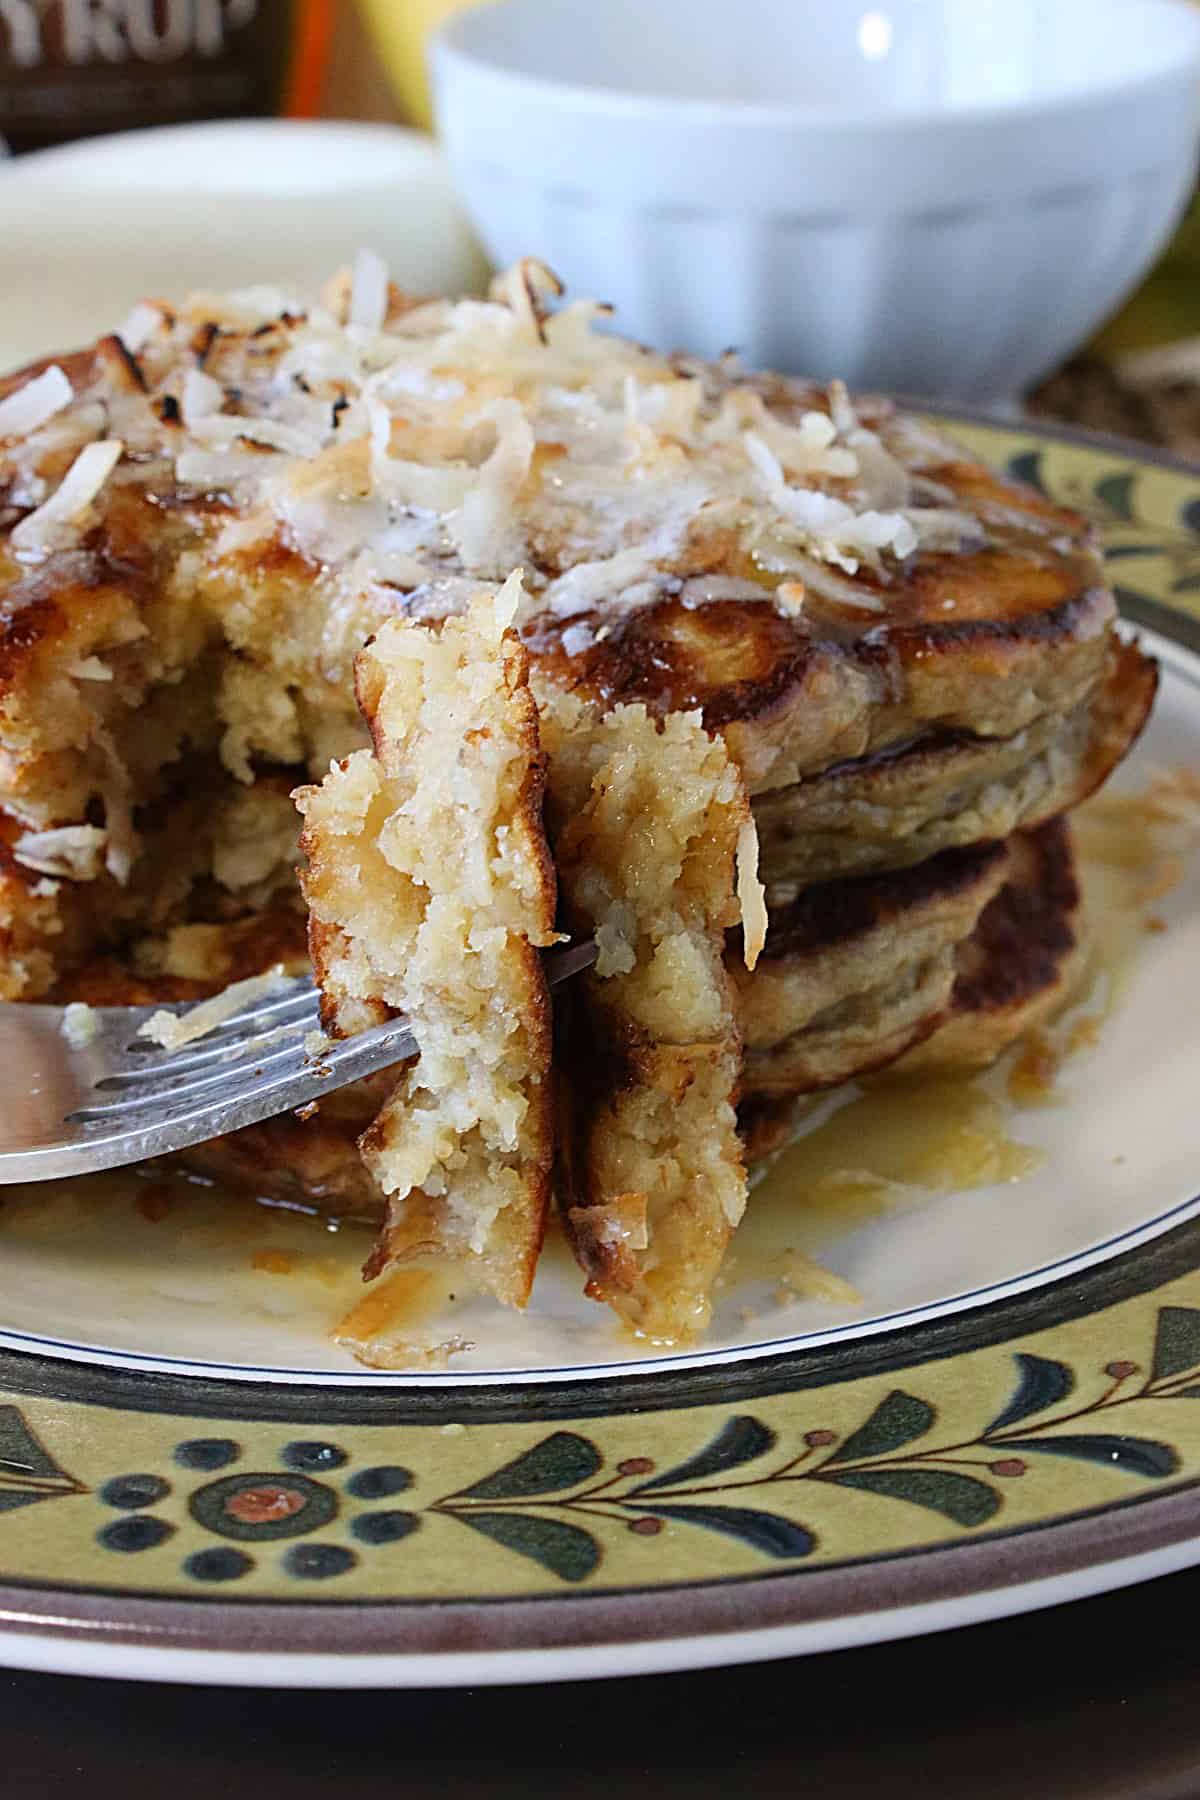 A fork with a bite of Oatmeal Pancakes with Banana and Coconut.